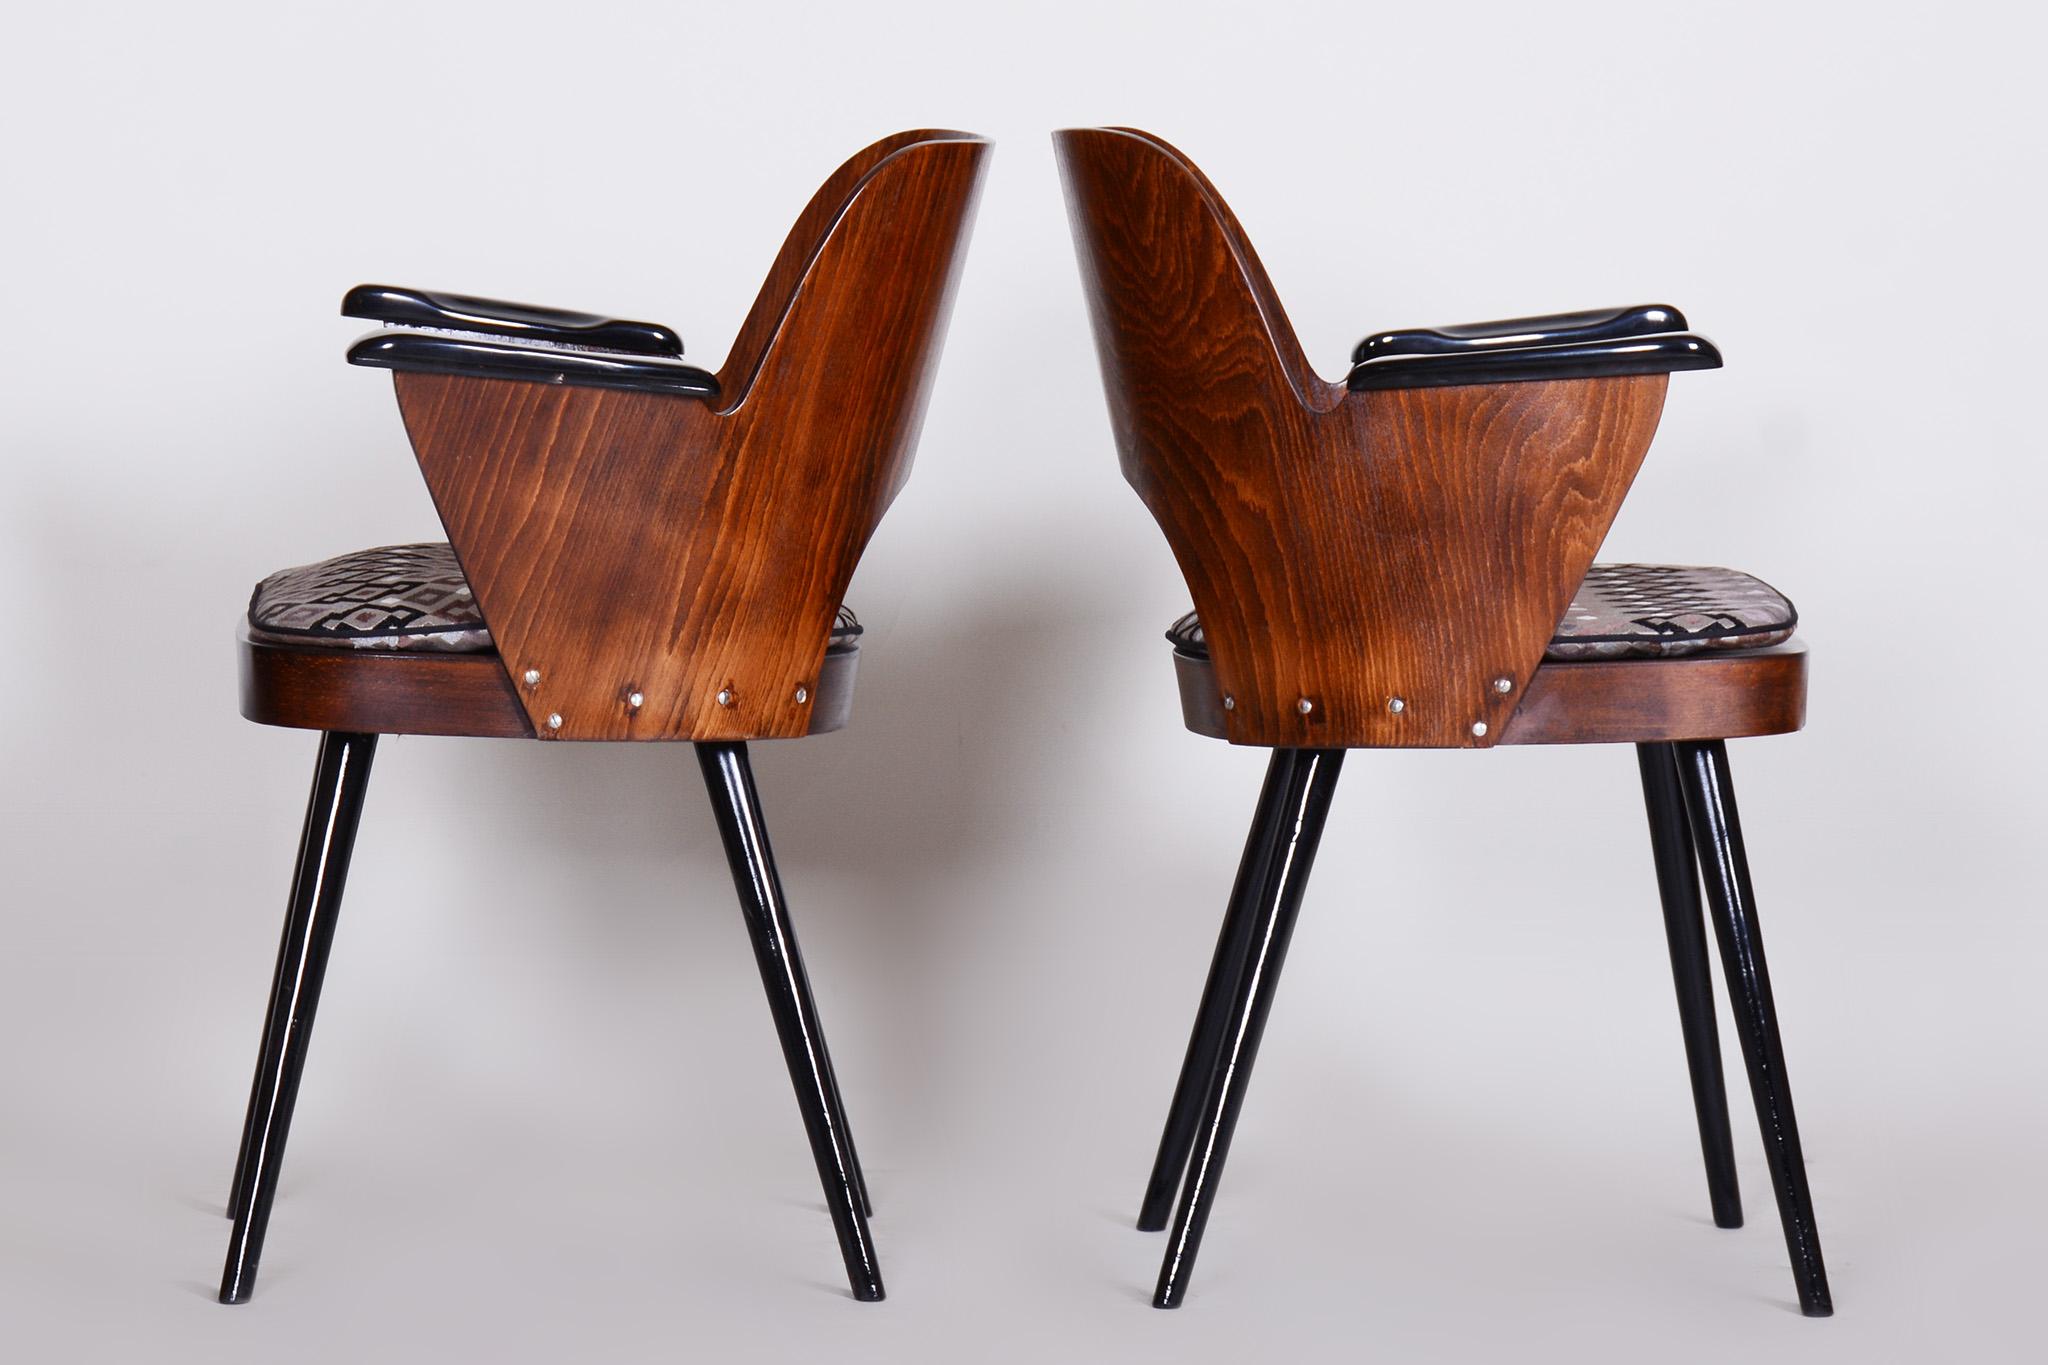 Restored Pair of Mid-Century Armchairs by Oswald Heardtl, Beech, Czechia, 1950s In Good Condition For Sale In Horomerice, CZ